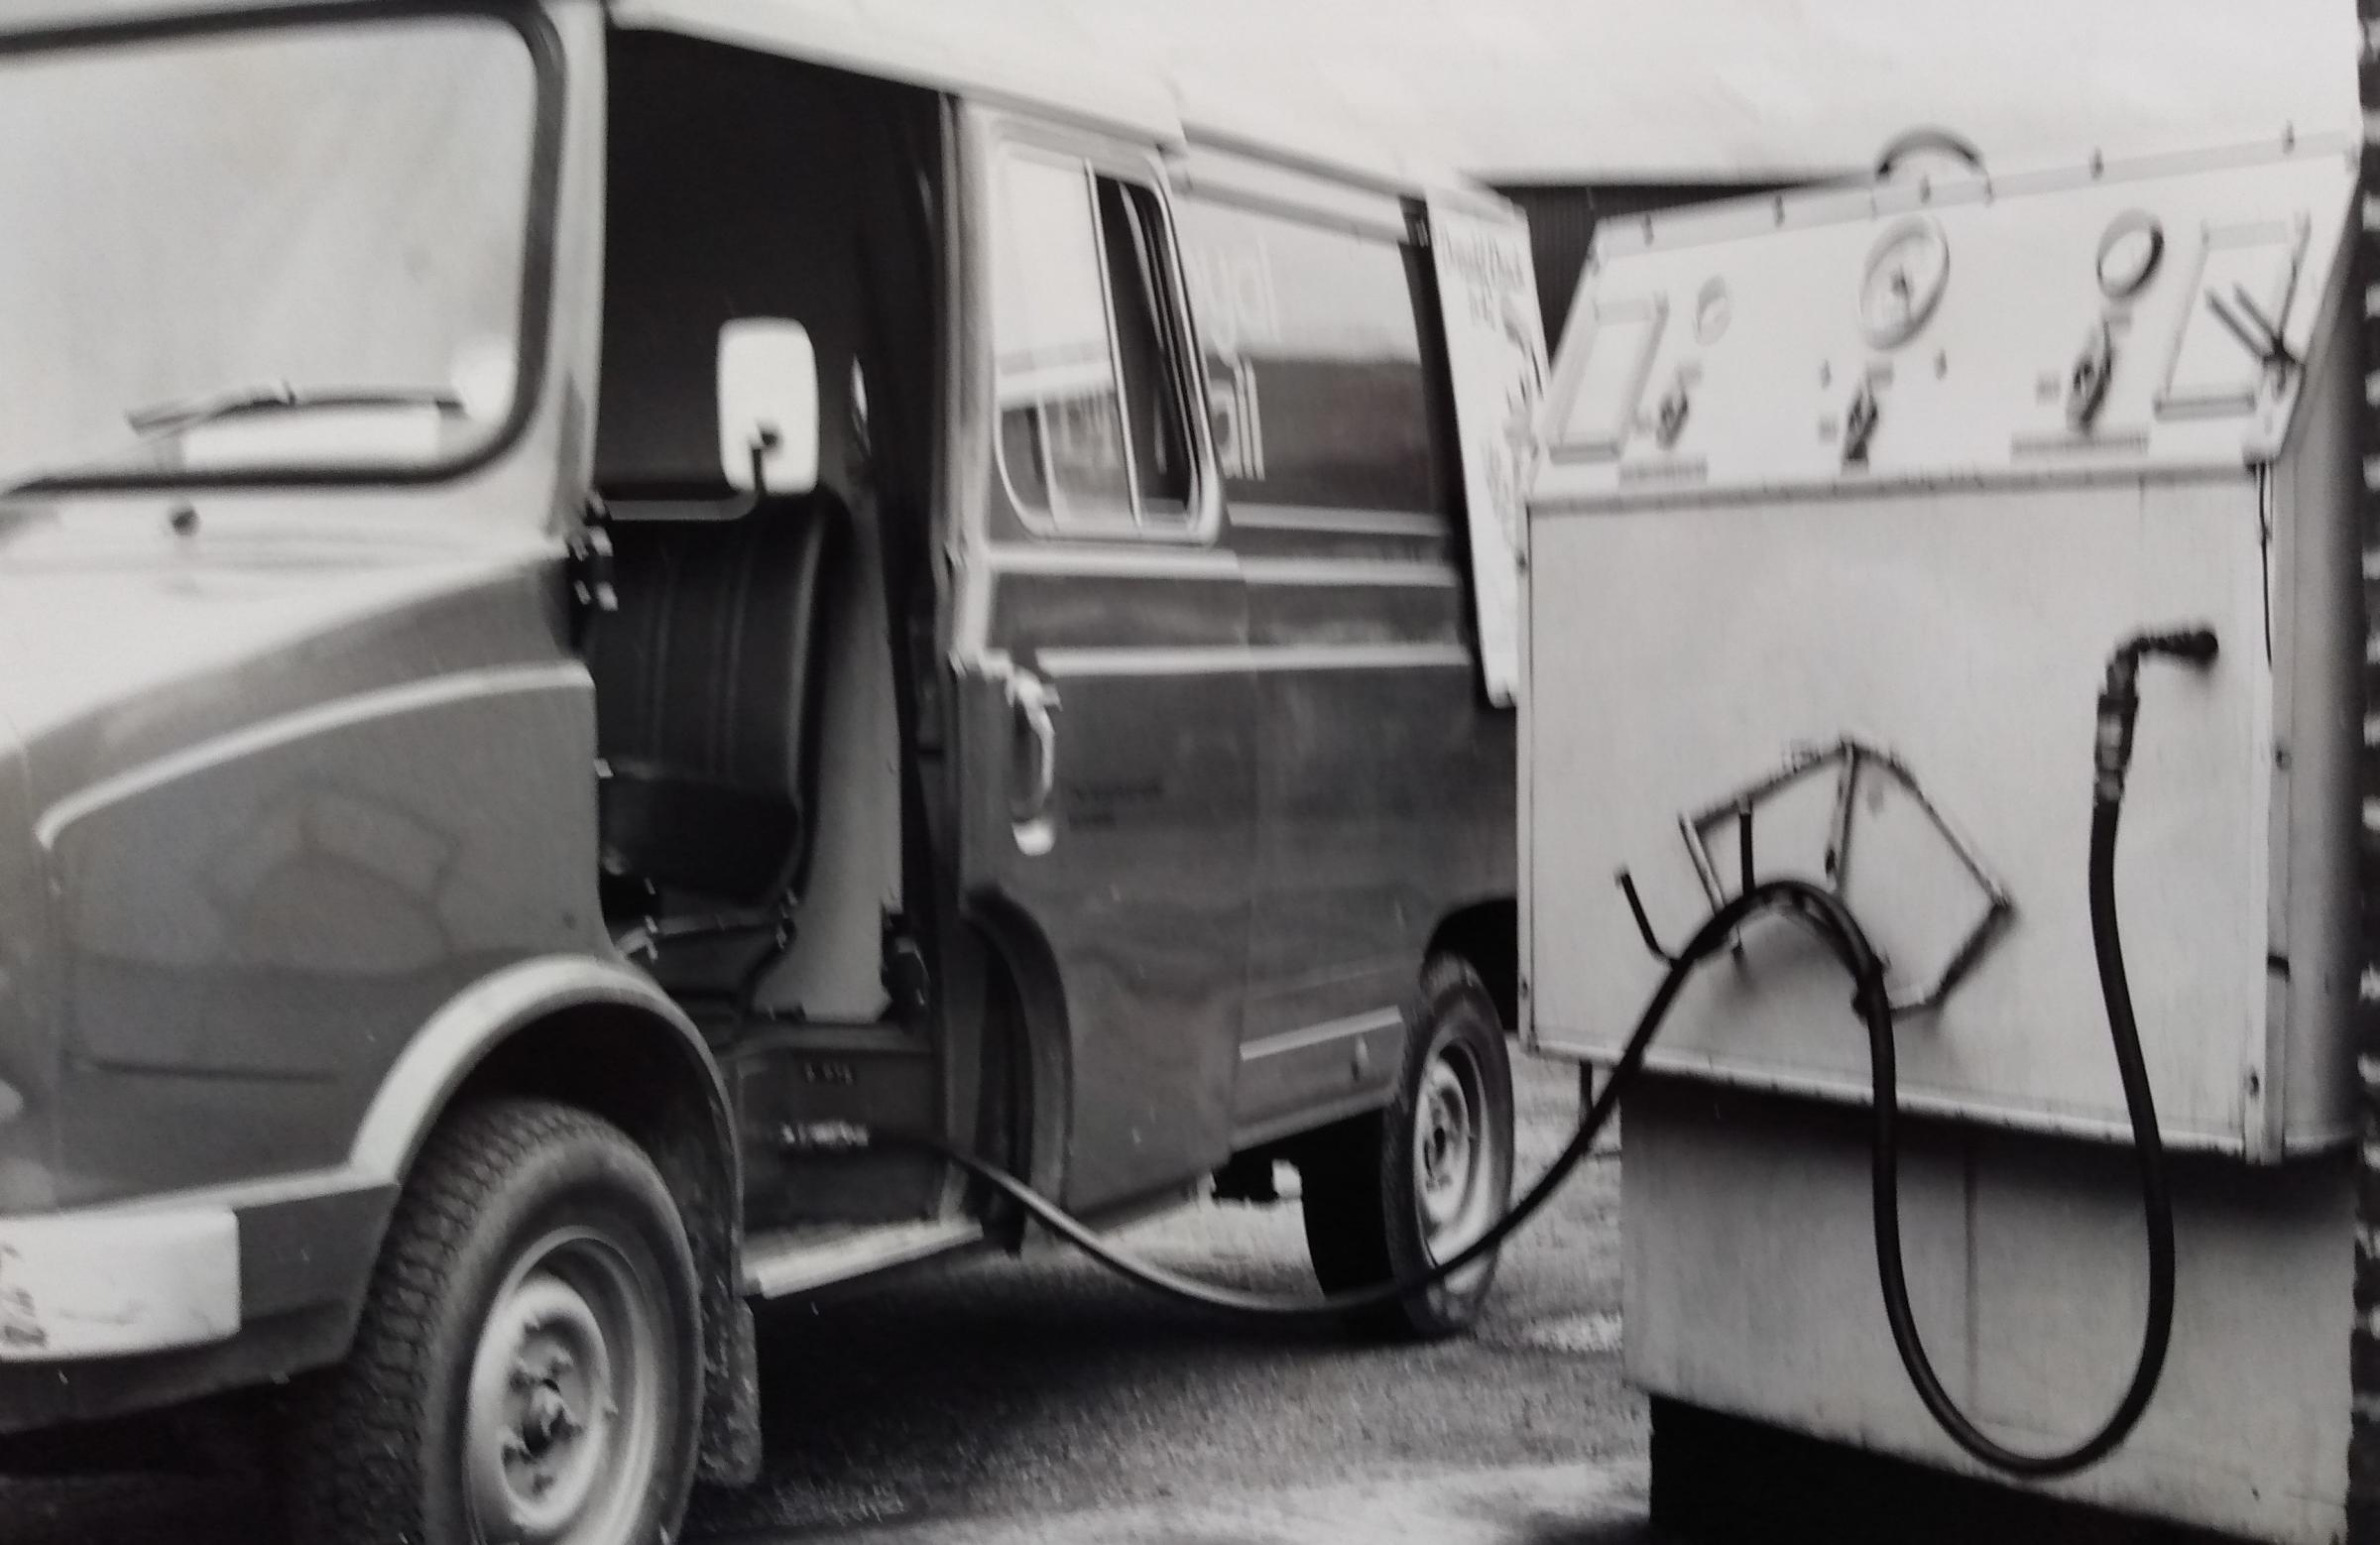 July 1976 and the Post Office’s Motor Transport Group had developed an oil recycling device for its vans